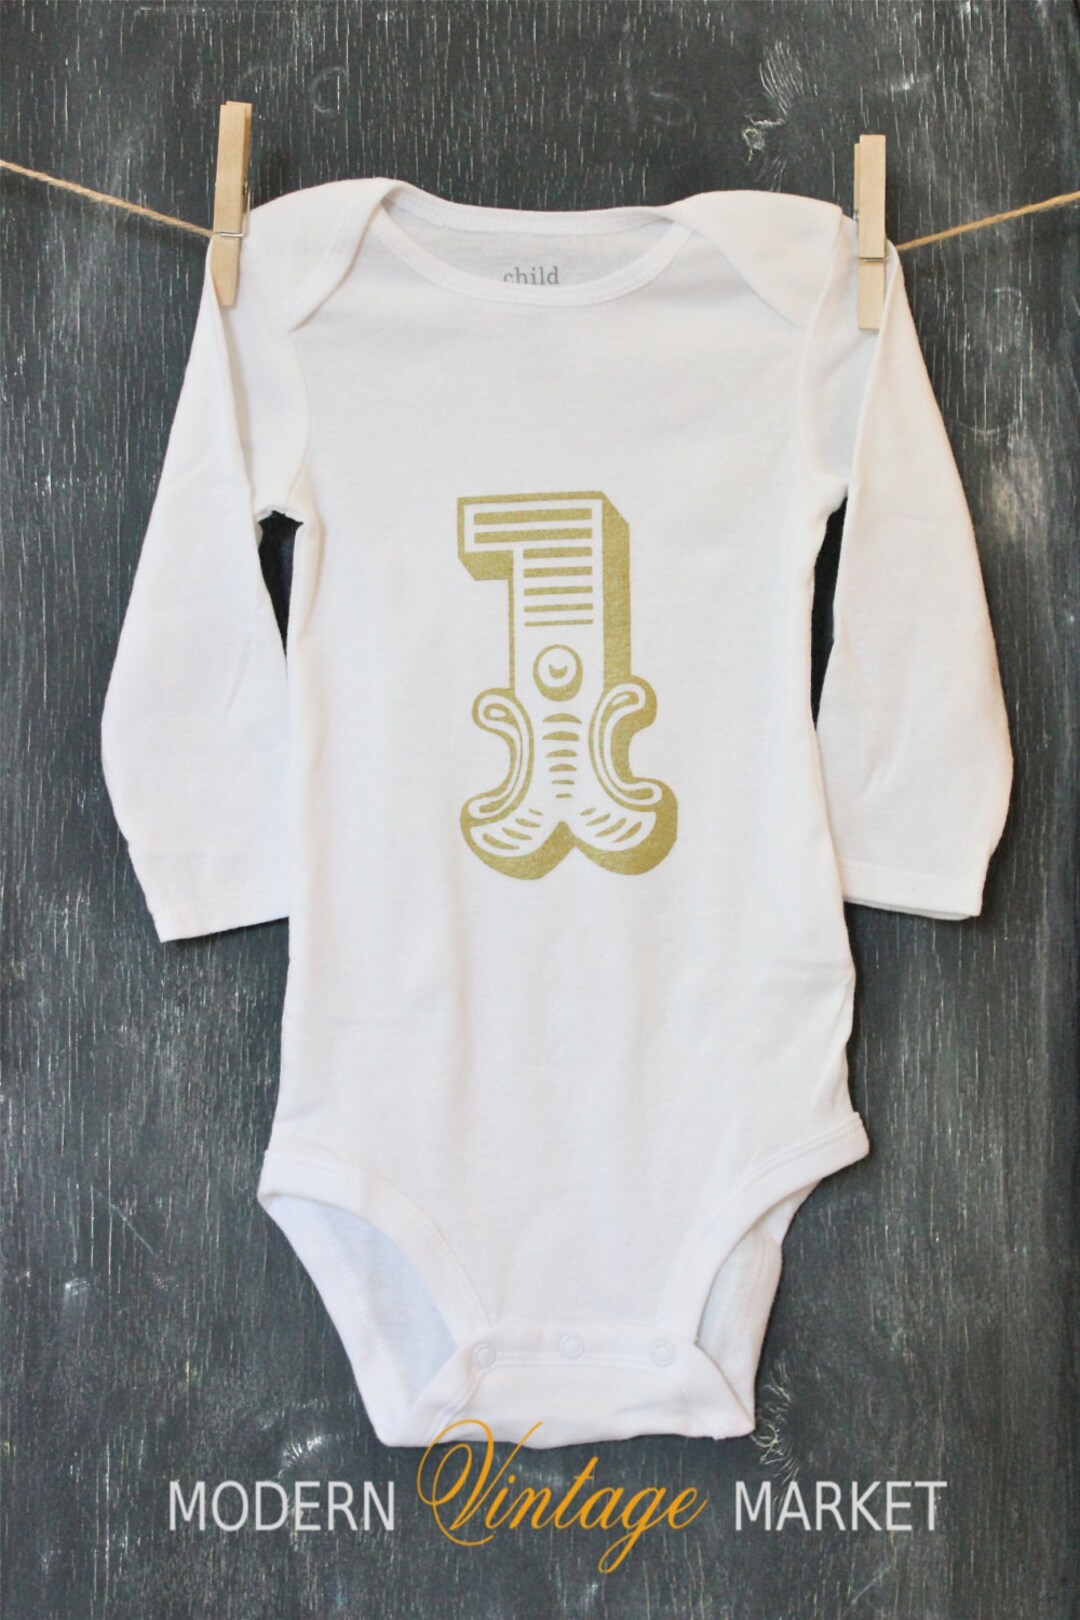 Circus Onesie-Personalized Big top Circus Onesize- Baby Clothes